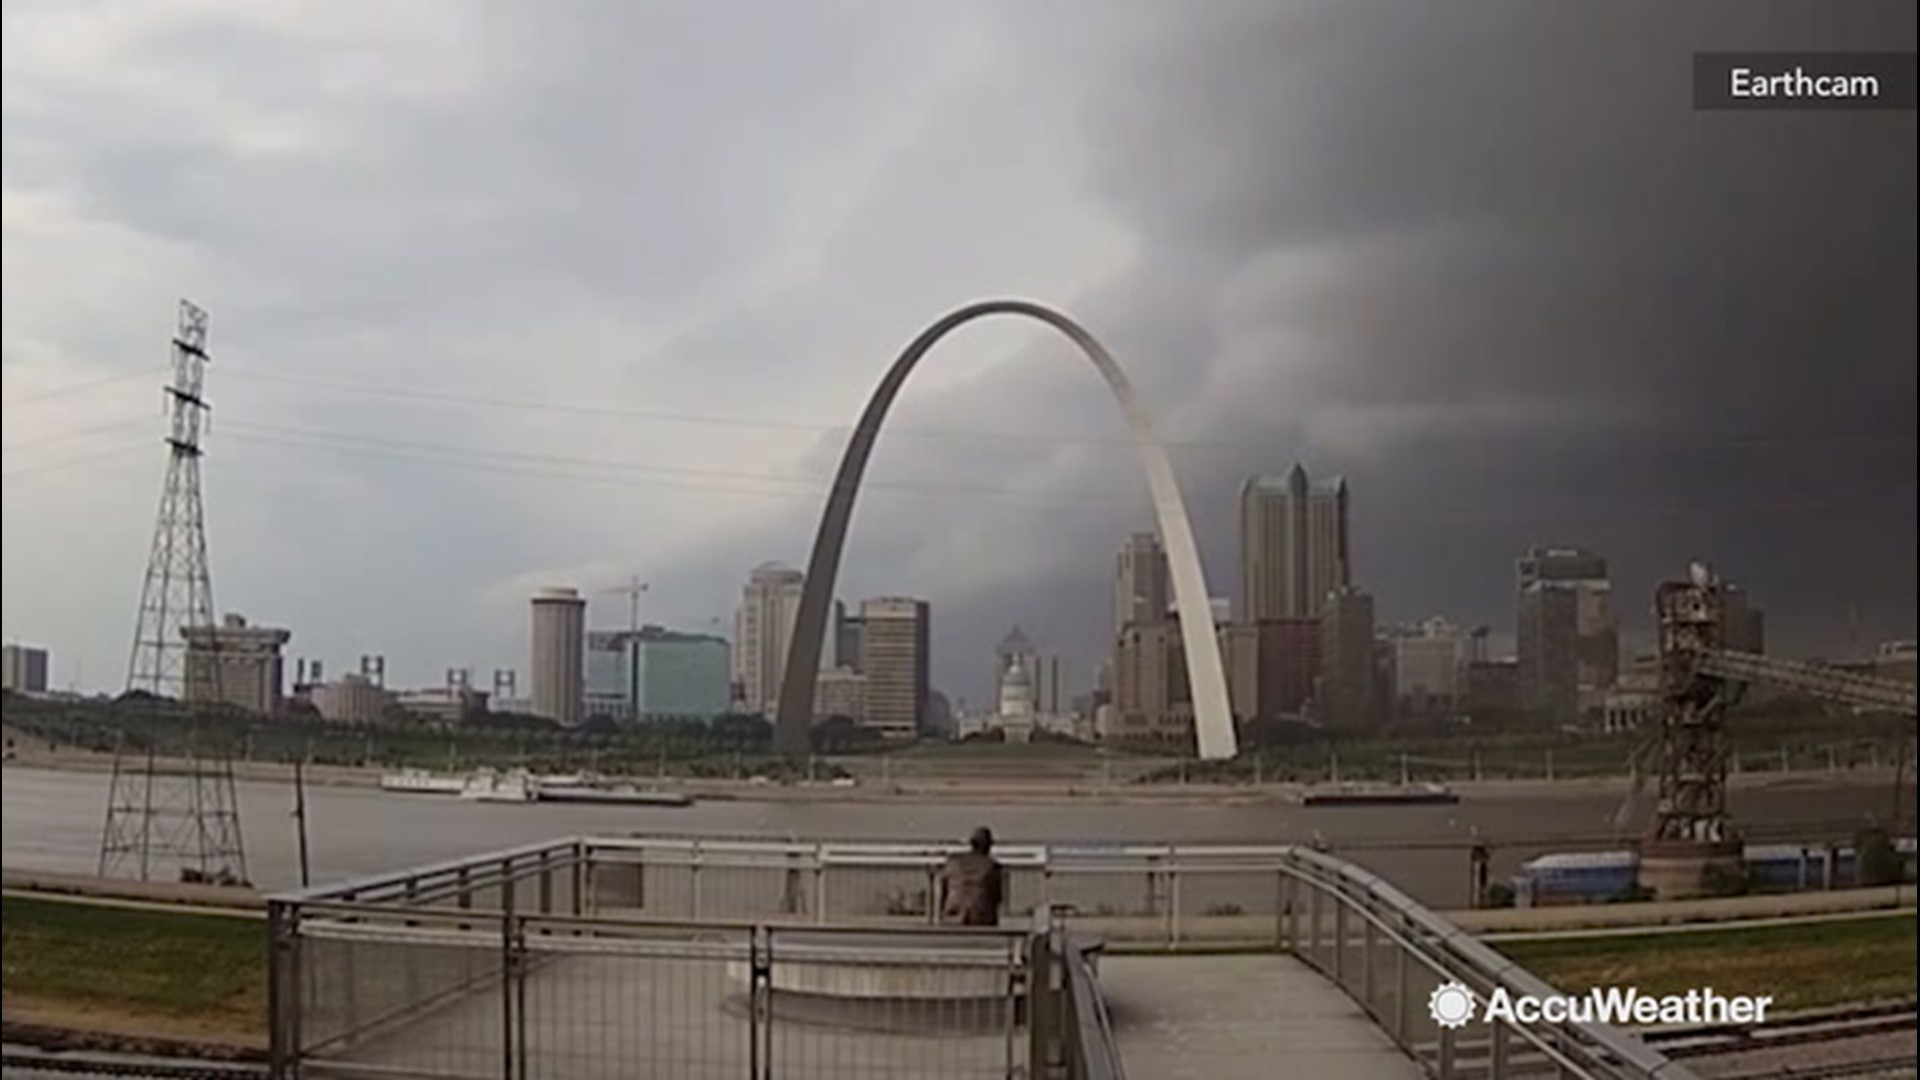 Take a look at this impressive shelf cloud rolling over the iconic Gateway Arch in St. Louis, Missouri. Severe storms ravaged the area on Aug. 20.